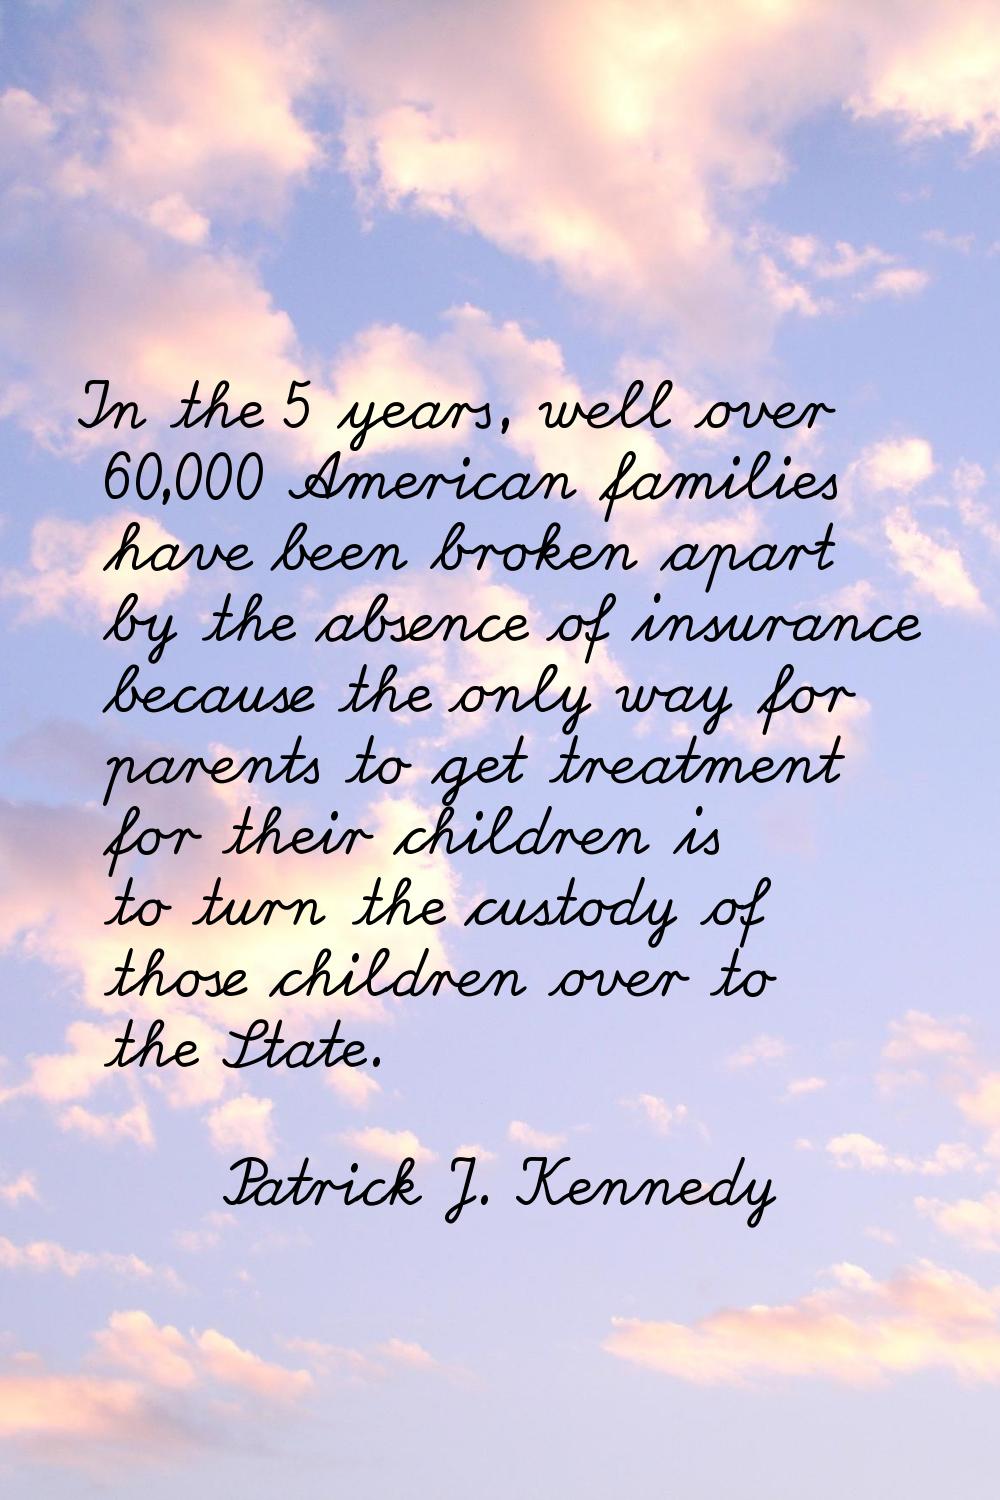 In the 5 years, well over 60,000 American families have been broken apart by the absence of insuran